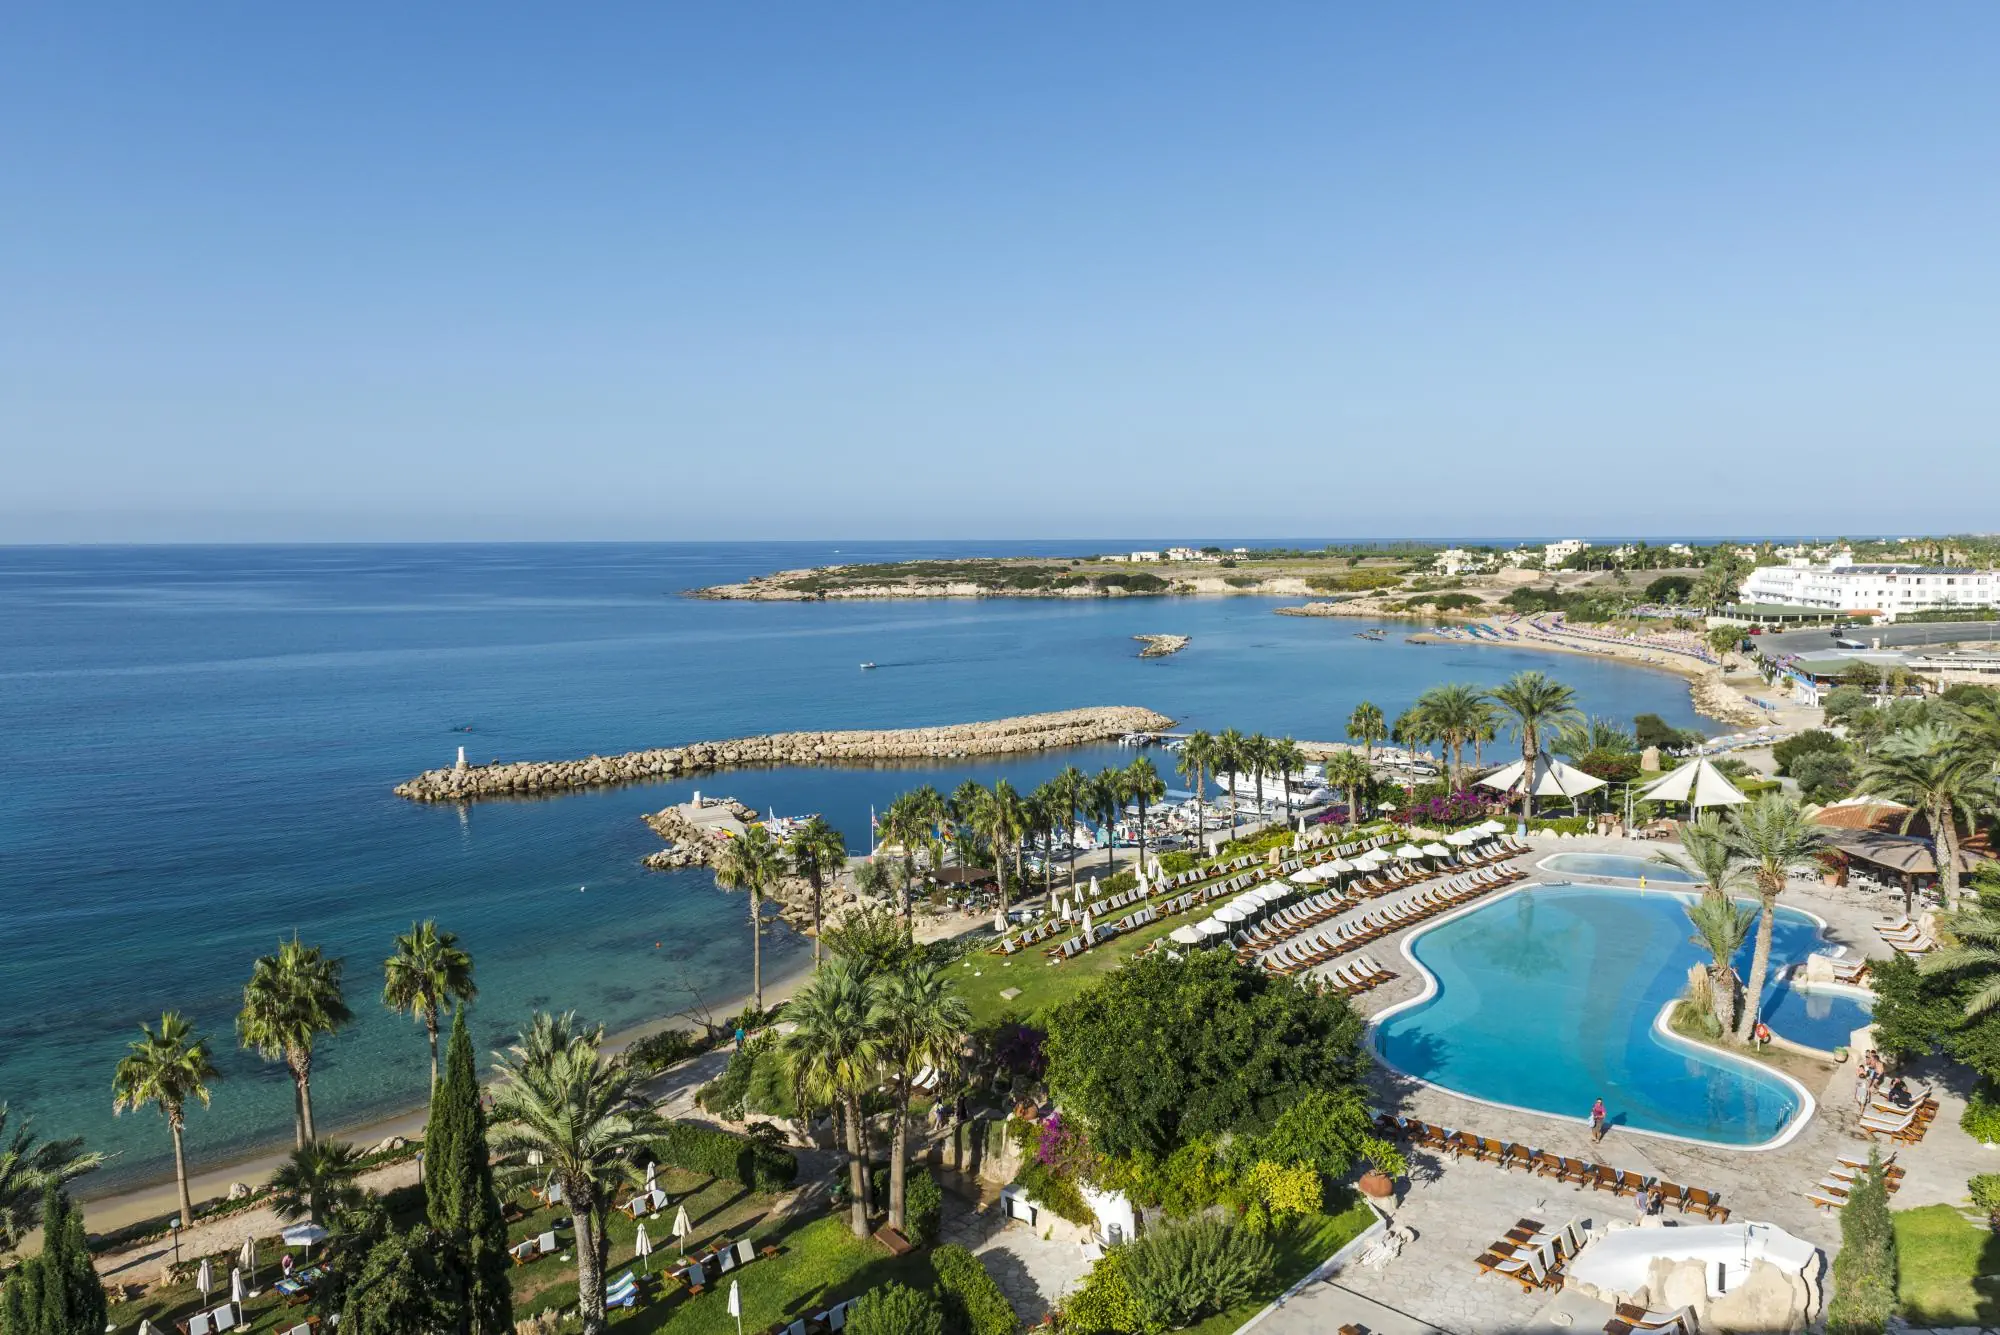 Cypr Pafos Peyia Coral Beach Hotel and Resort